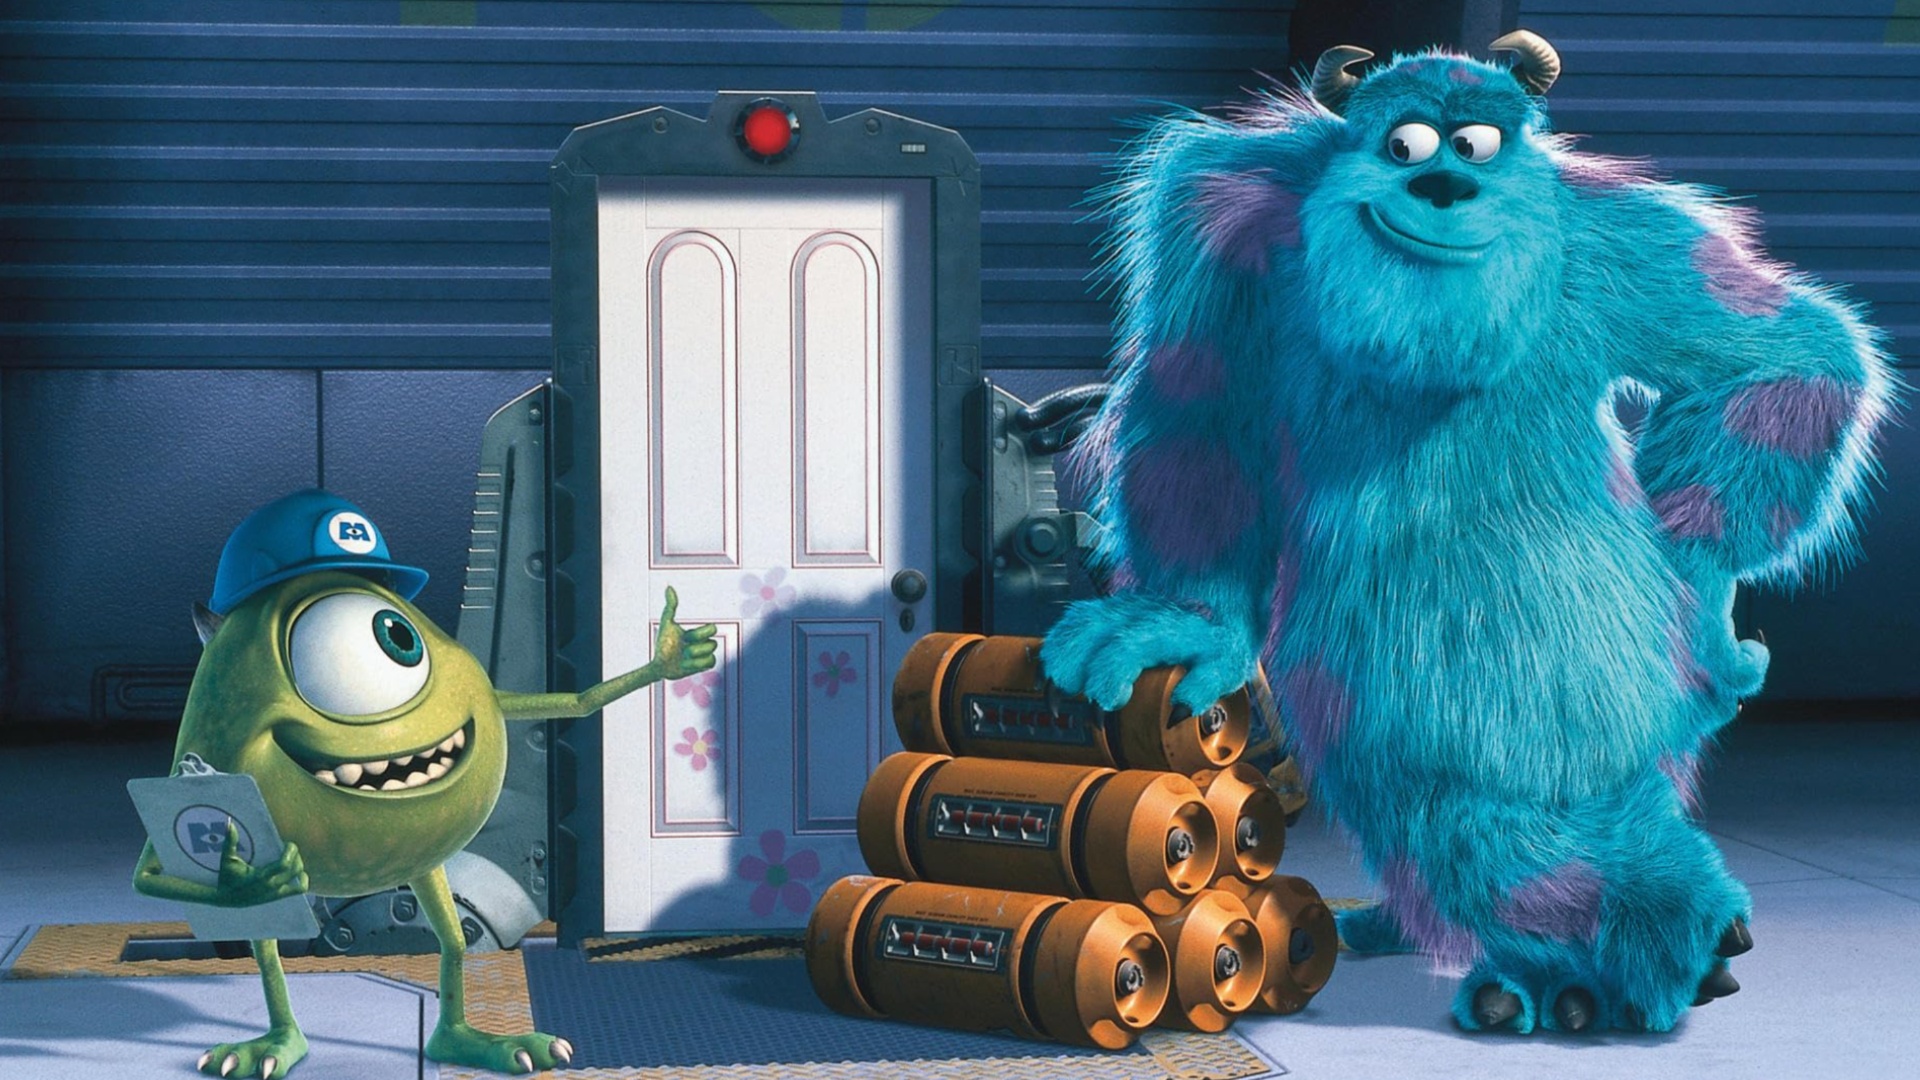 The ideal movie runtime is officially the same length as Monsters Inc. and Beetlejuice